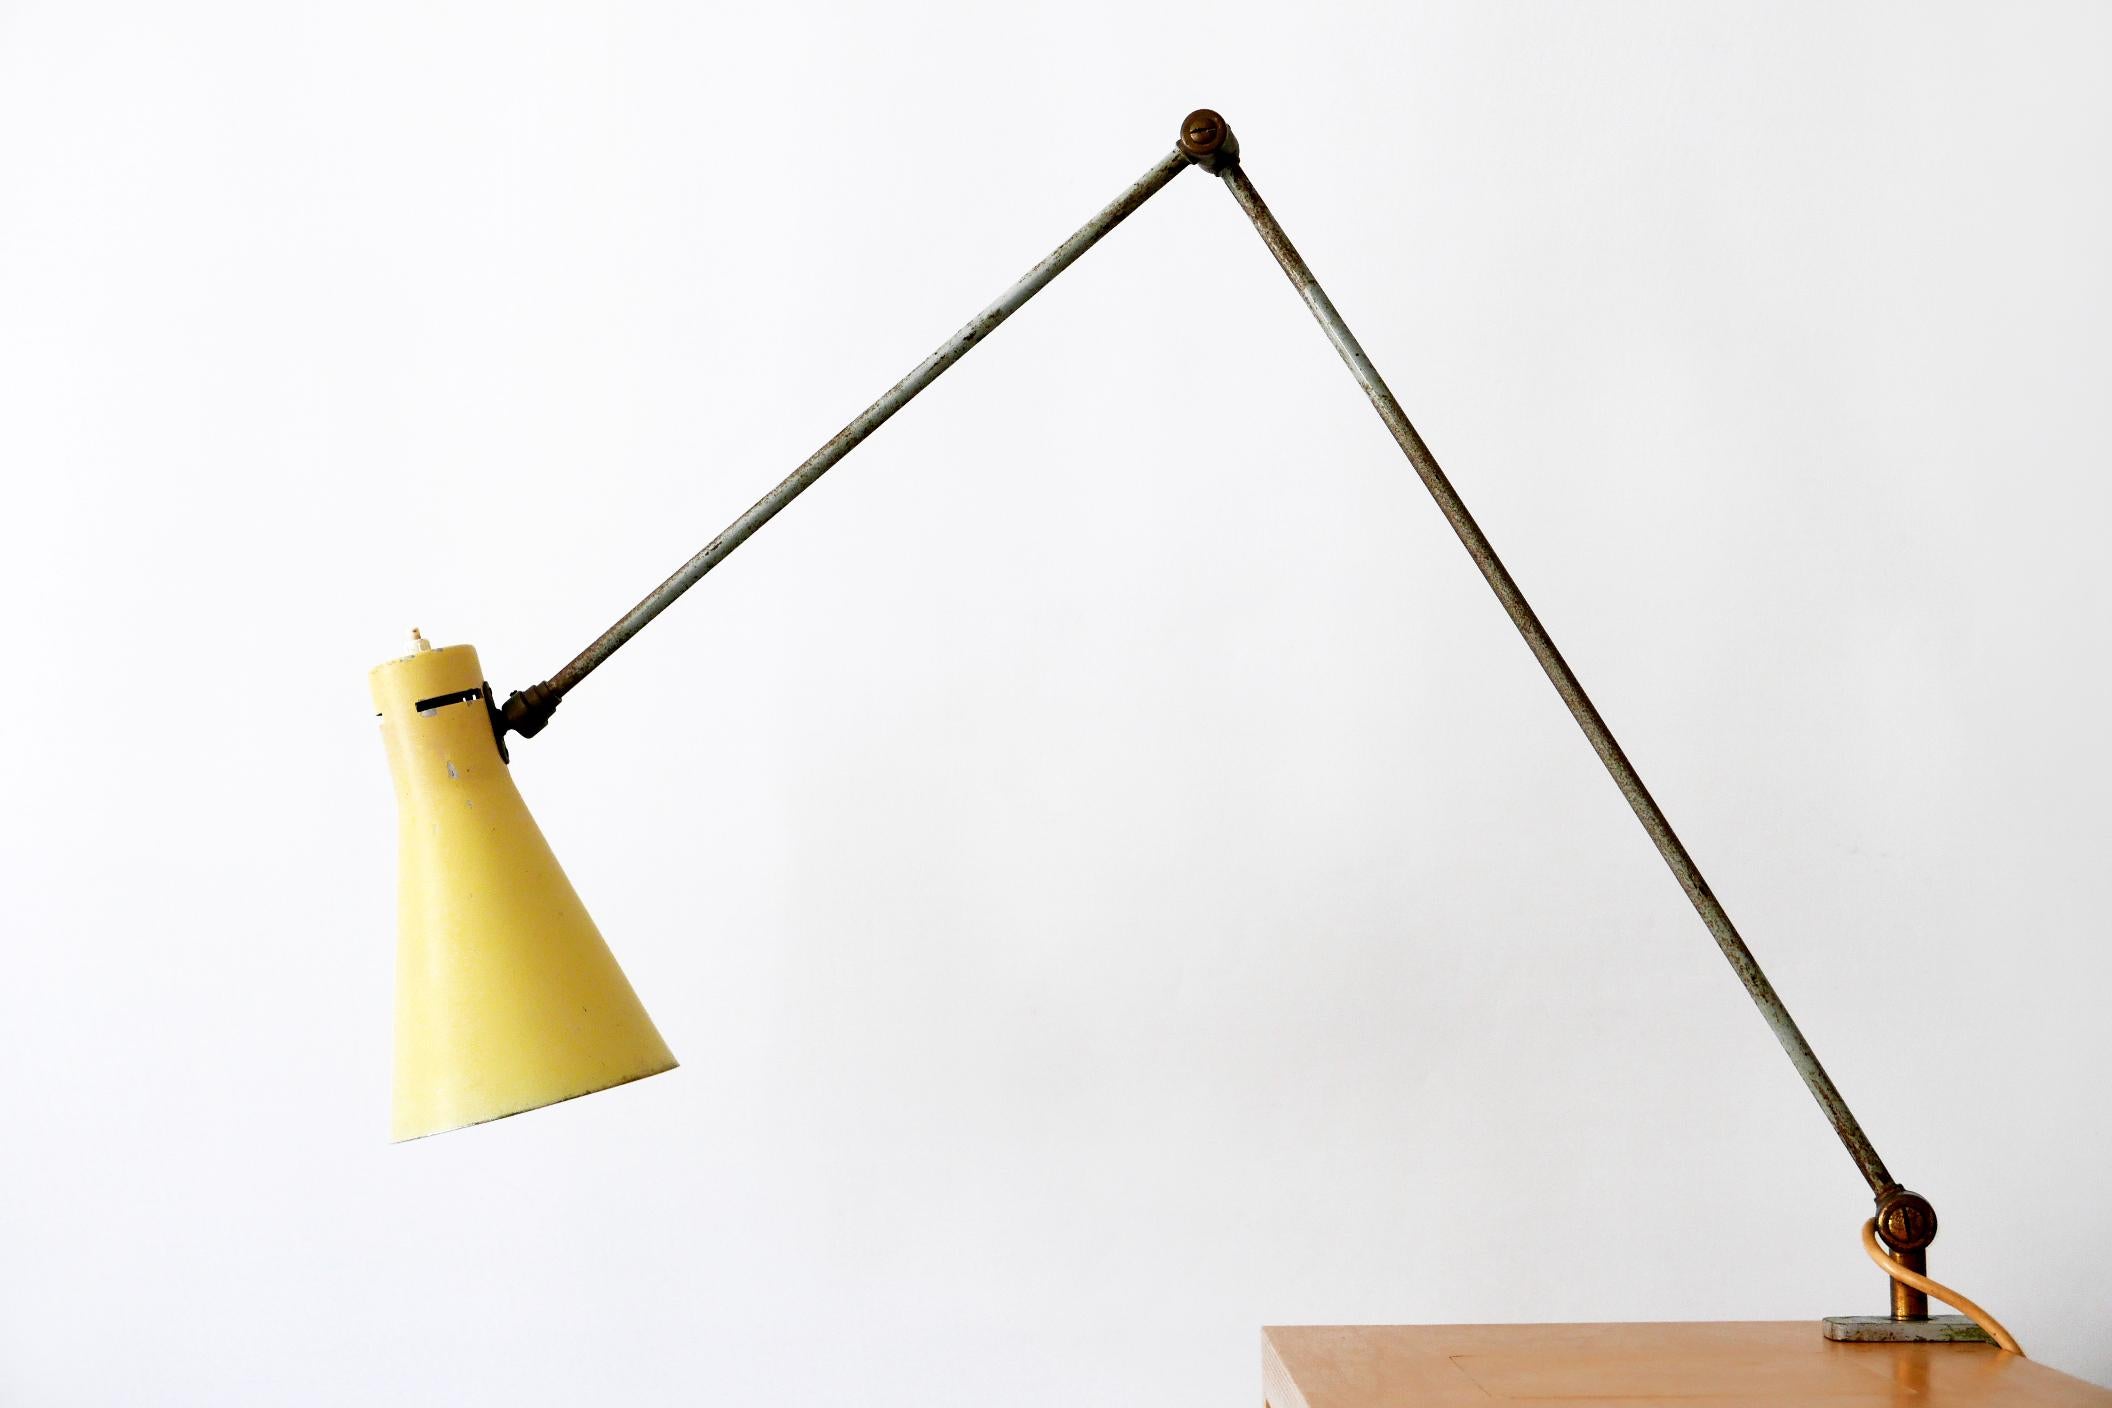 Mid-20th Century Articulated Clamp Table Light or Task Lamp by Vittoriano Vigano for Arteluce For Sale